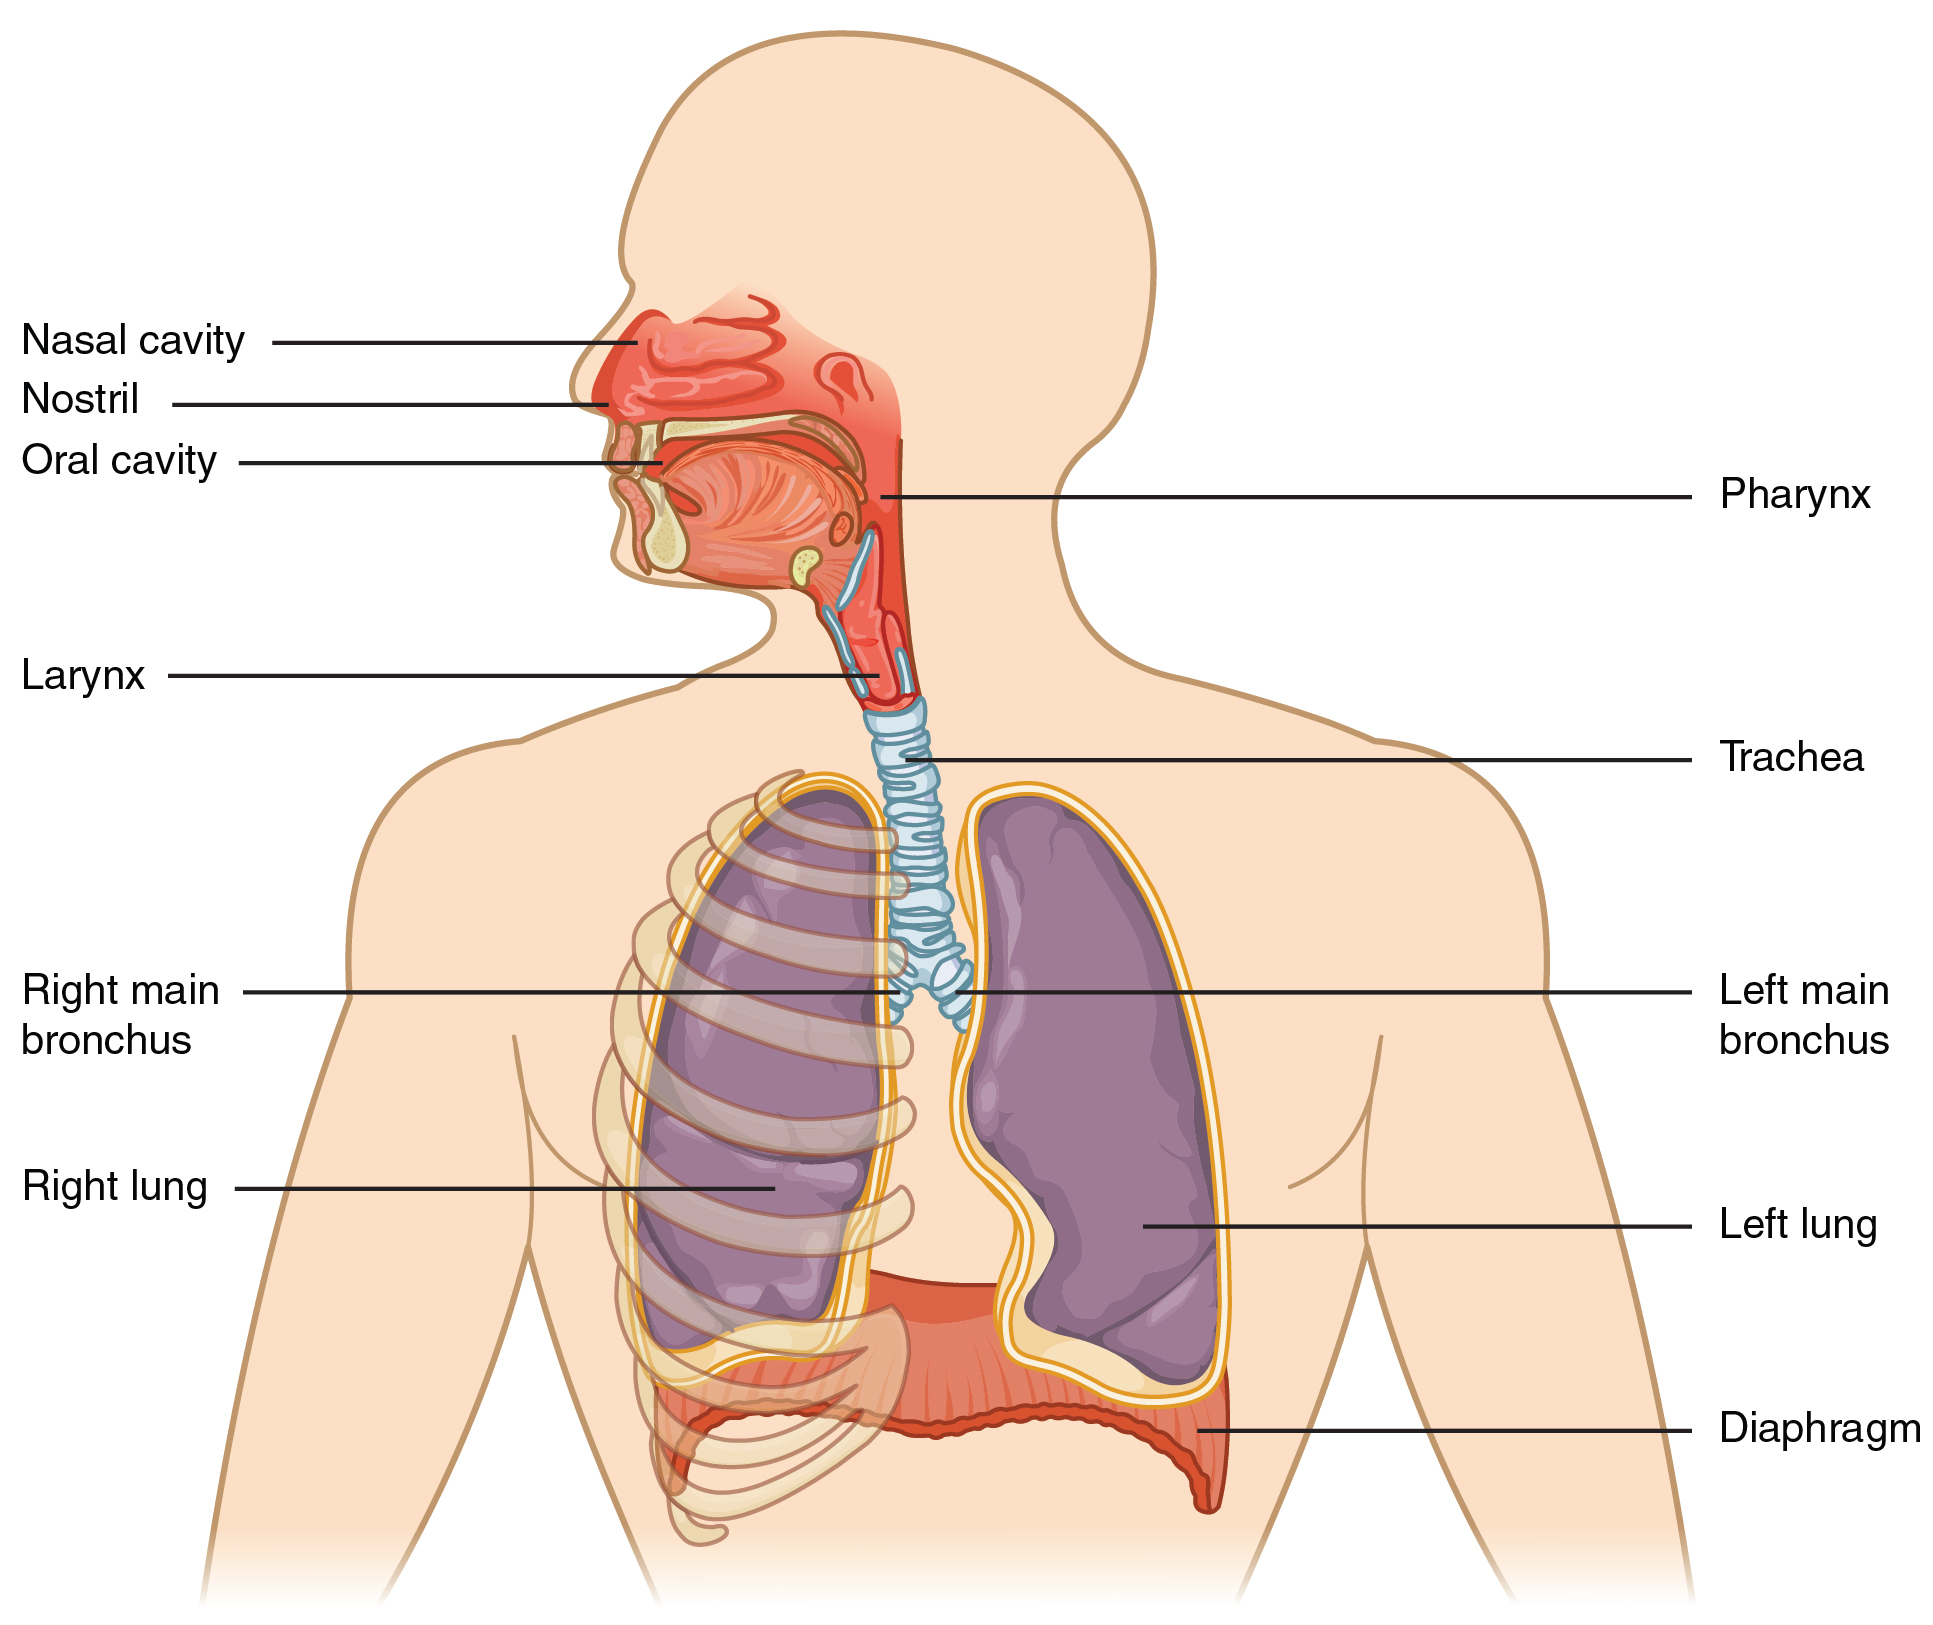 organs-and-structures-of-the-respiratory-system-anatomy-and-physiology